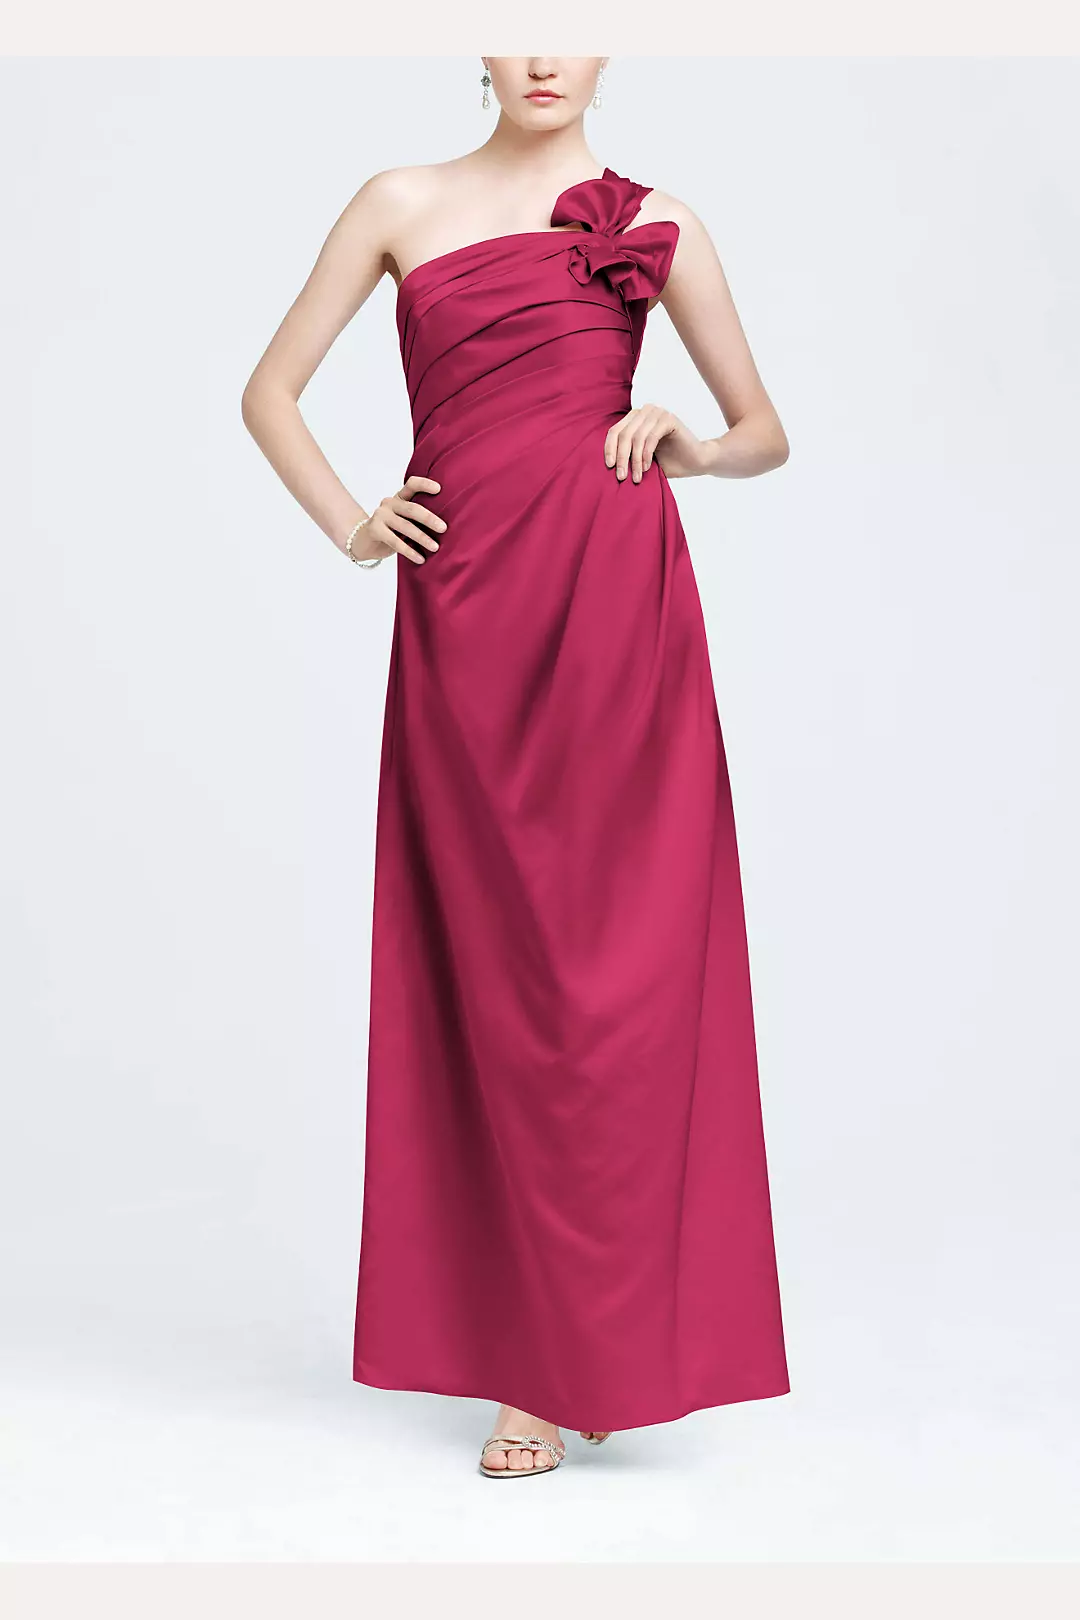 One Shoulder Satin Ballgown with Fan Detail Image